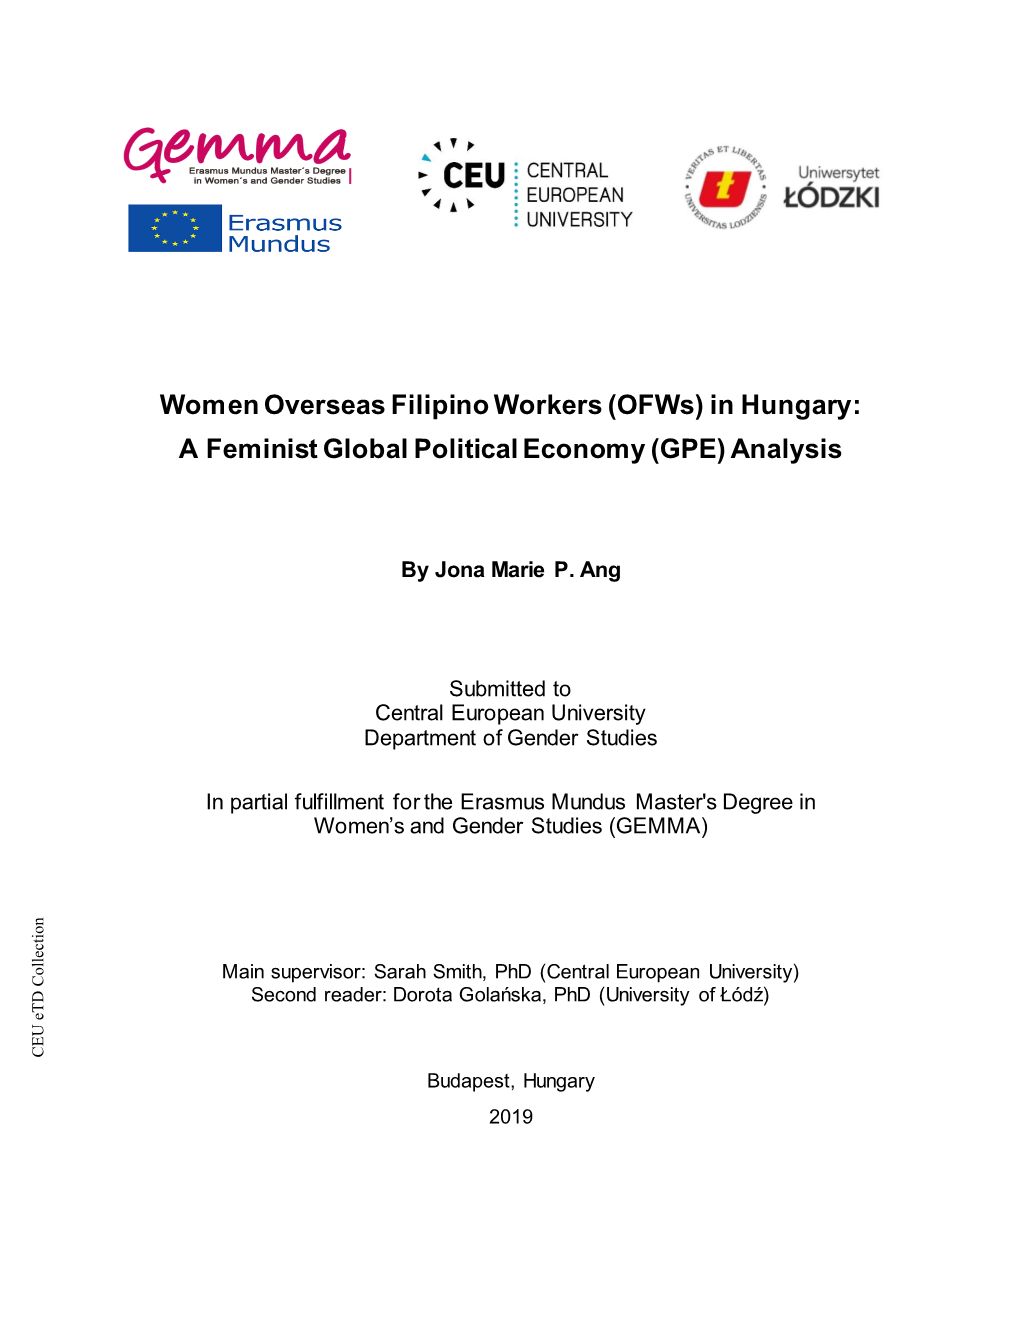 Women Overseas Filipino Workers (Ofws) in Hungary: a Feminist Global Political Economy (GPE) Analysis